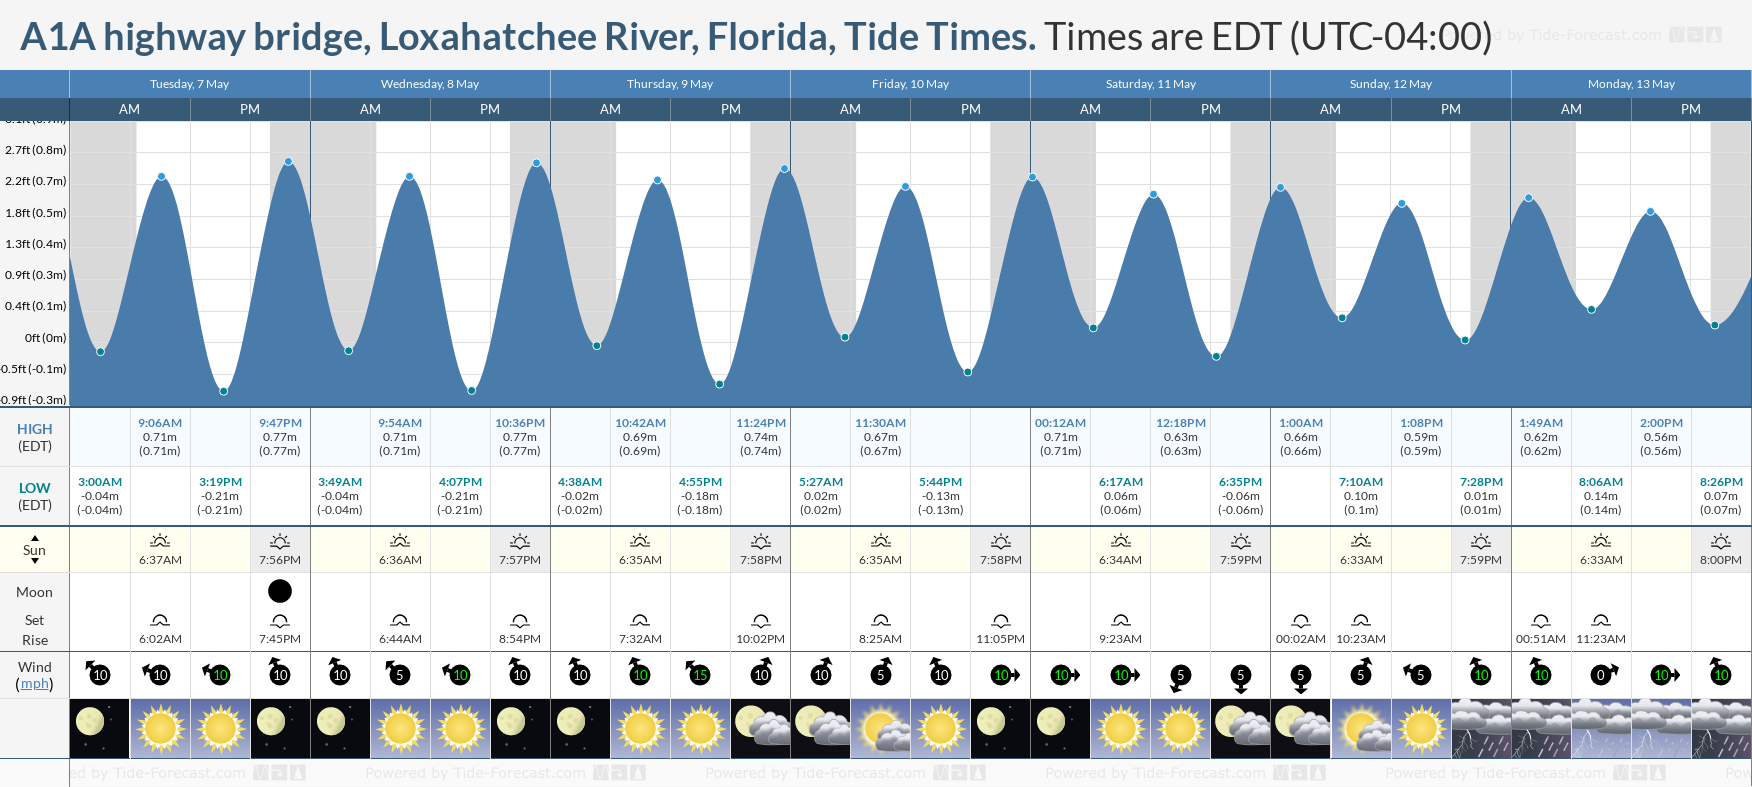 A1A highway bridge, Loxahatchee River, Florida Tide Chart including high and low tide tide times for the next 7 days